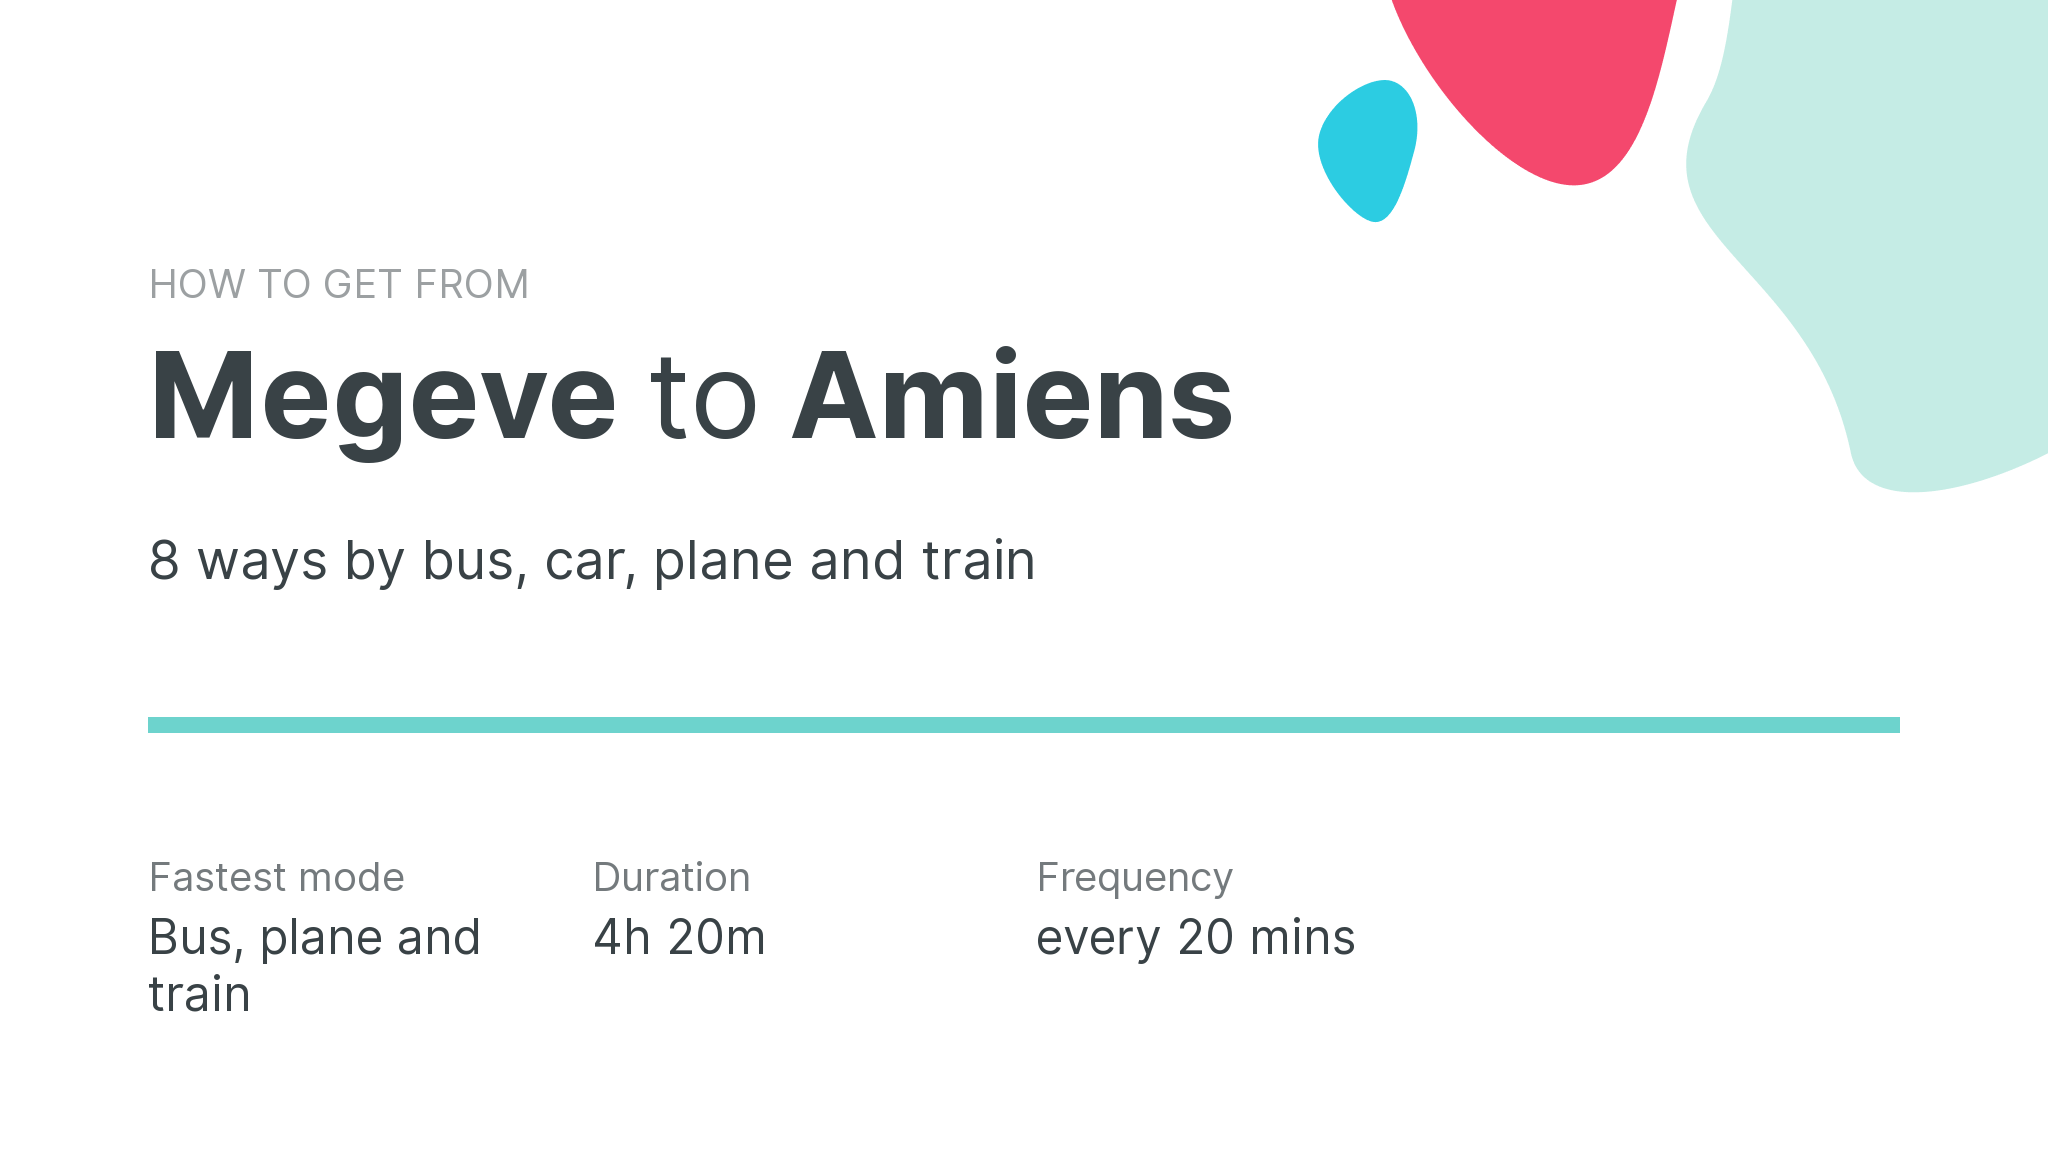 How do I get from Megeve to Amiens